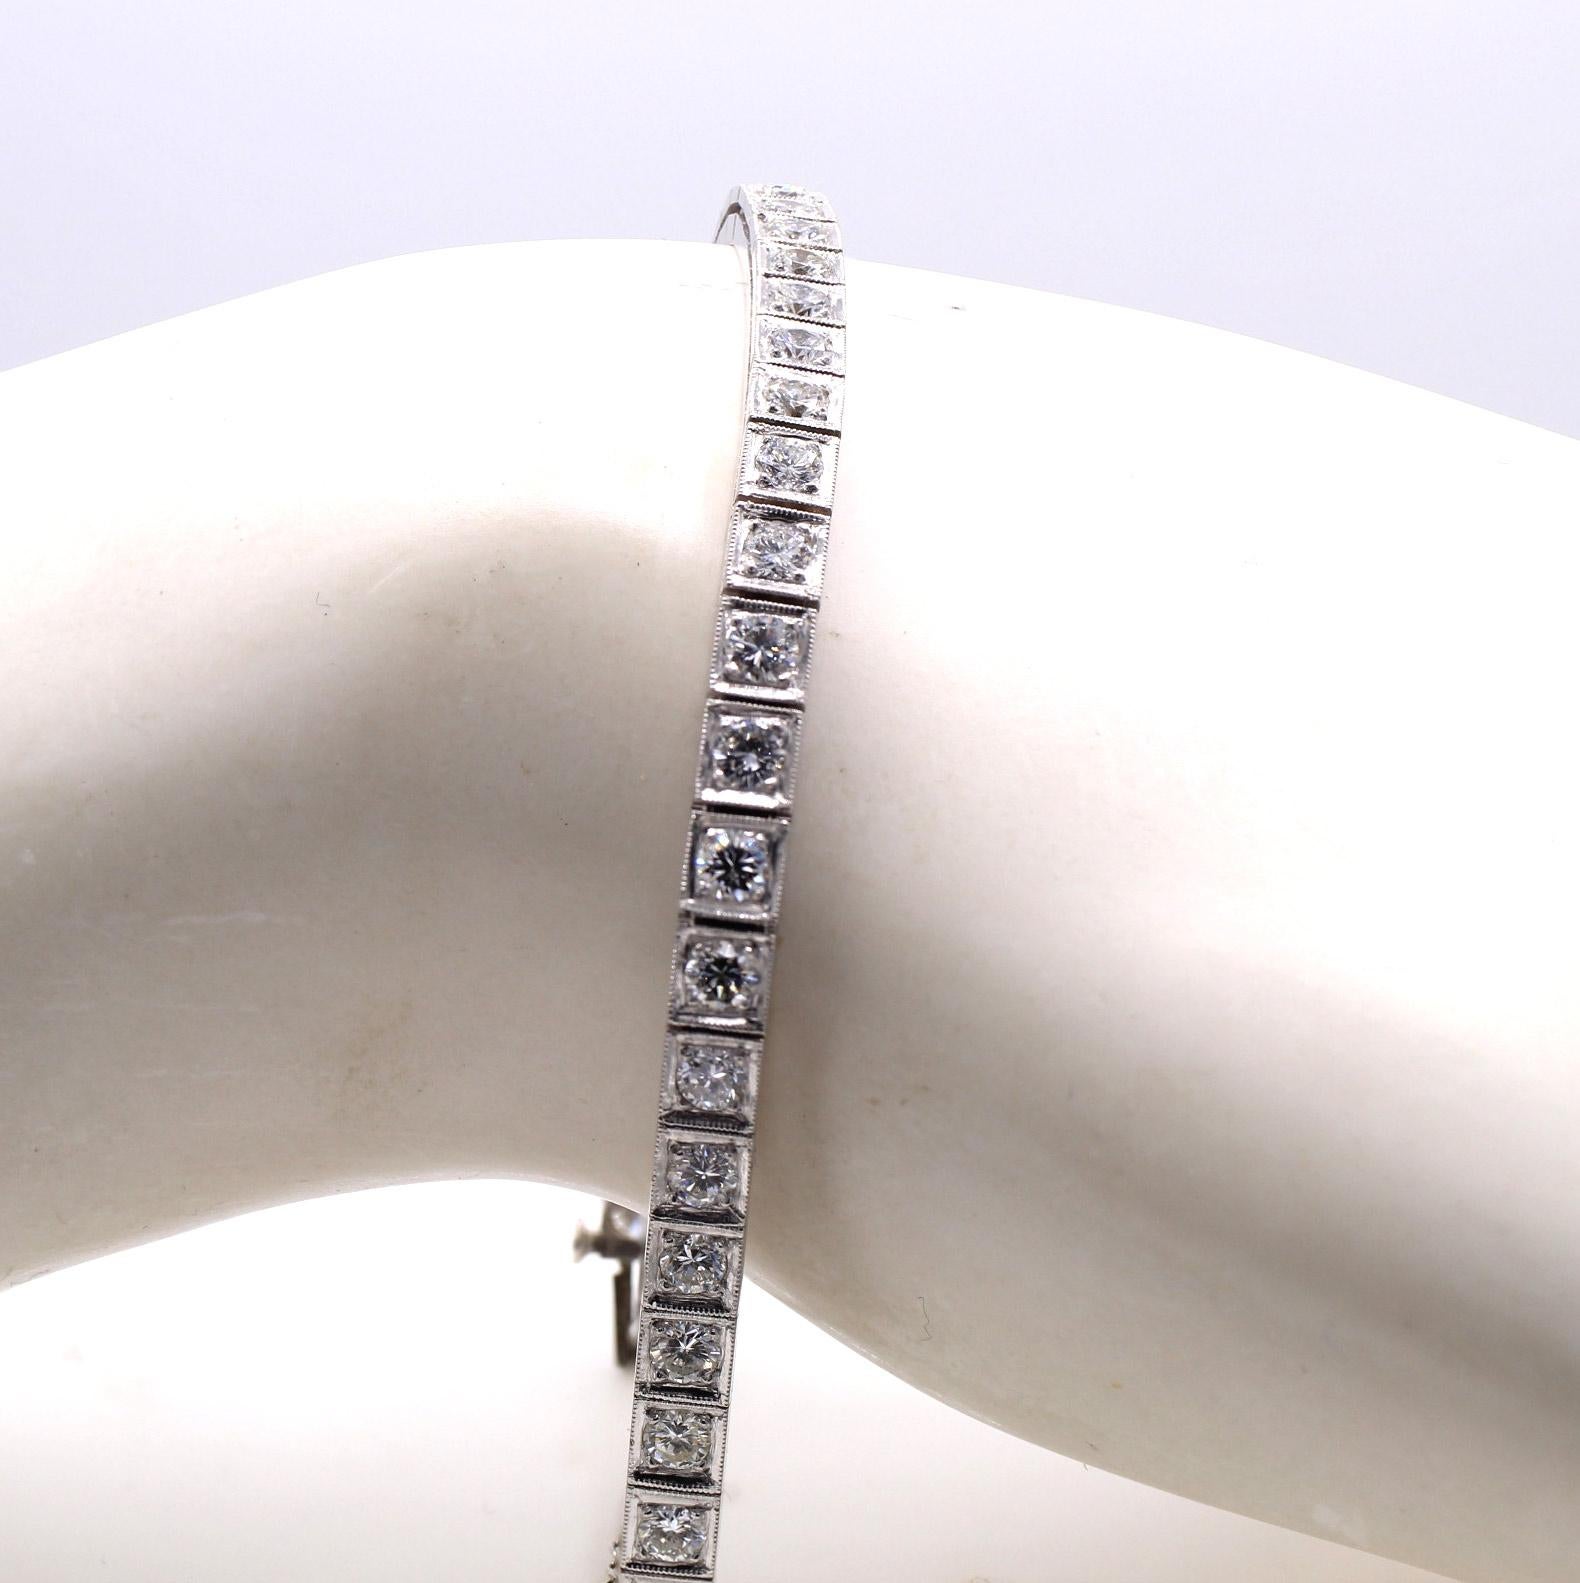 Beautifully handcrafted, this ca 1950s platinum tennis bracelet features 40 bright white and sparkly round brilliant cut diamonds with an approximate total diamond weight of 3 carats. The average color and clarity are G VS to SI. Each box link has